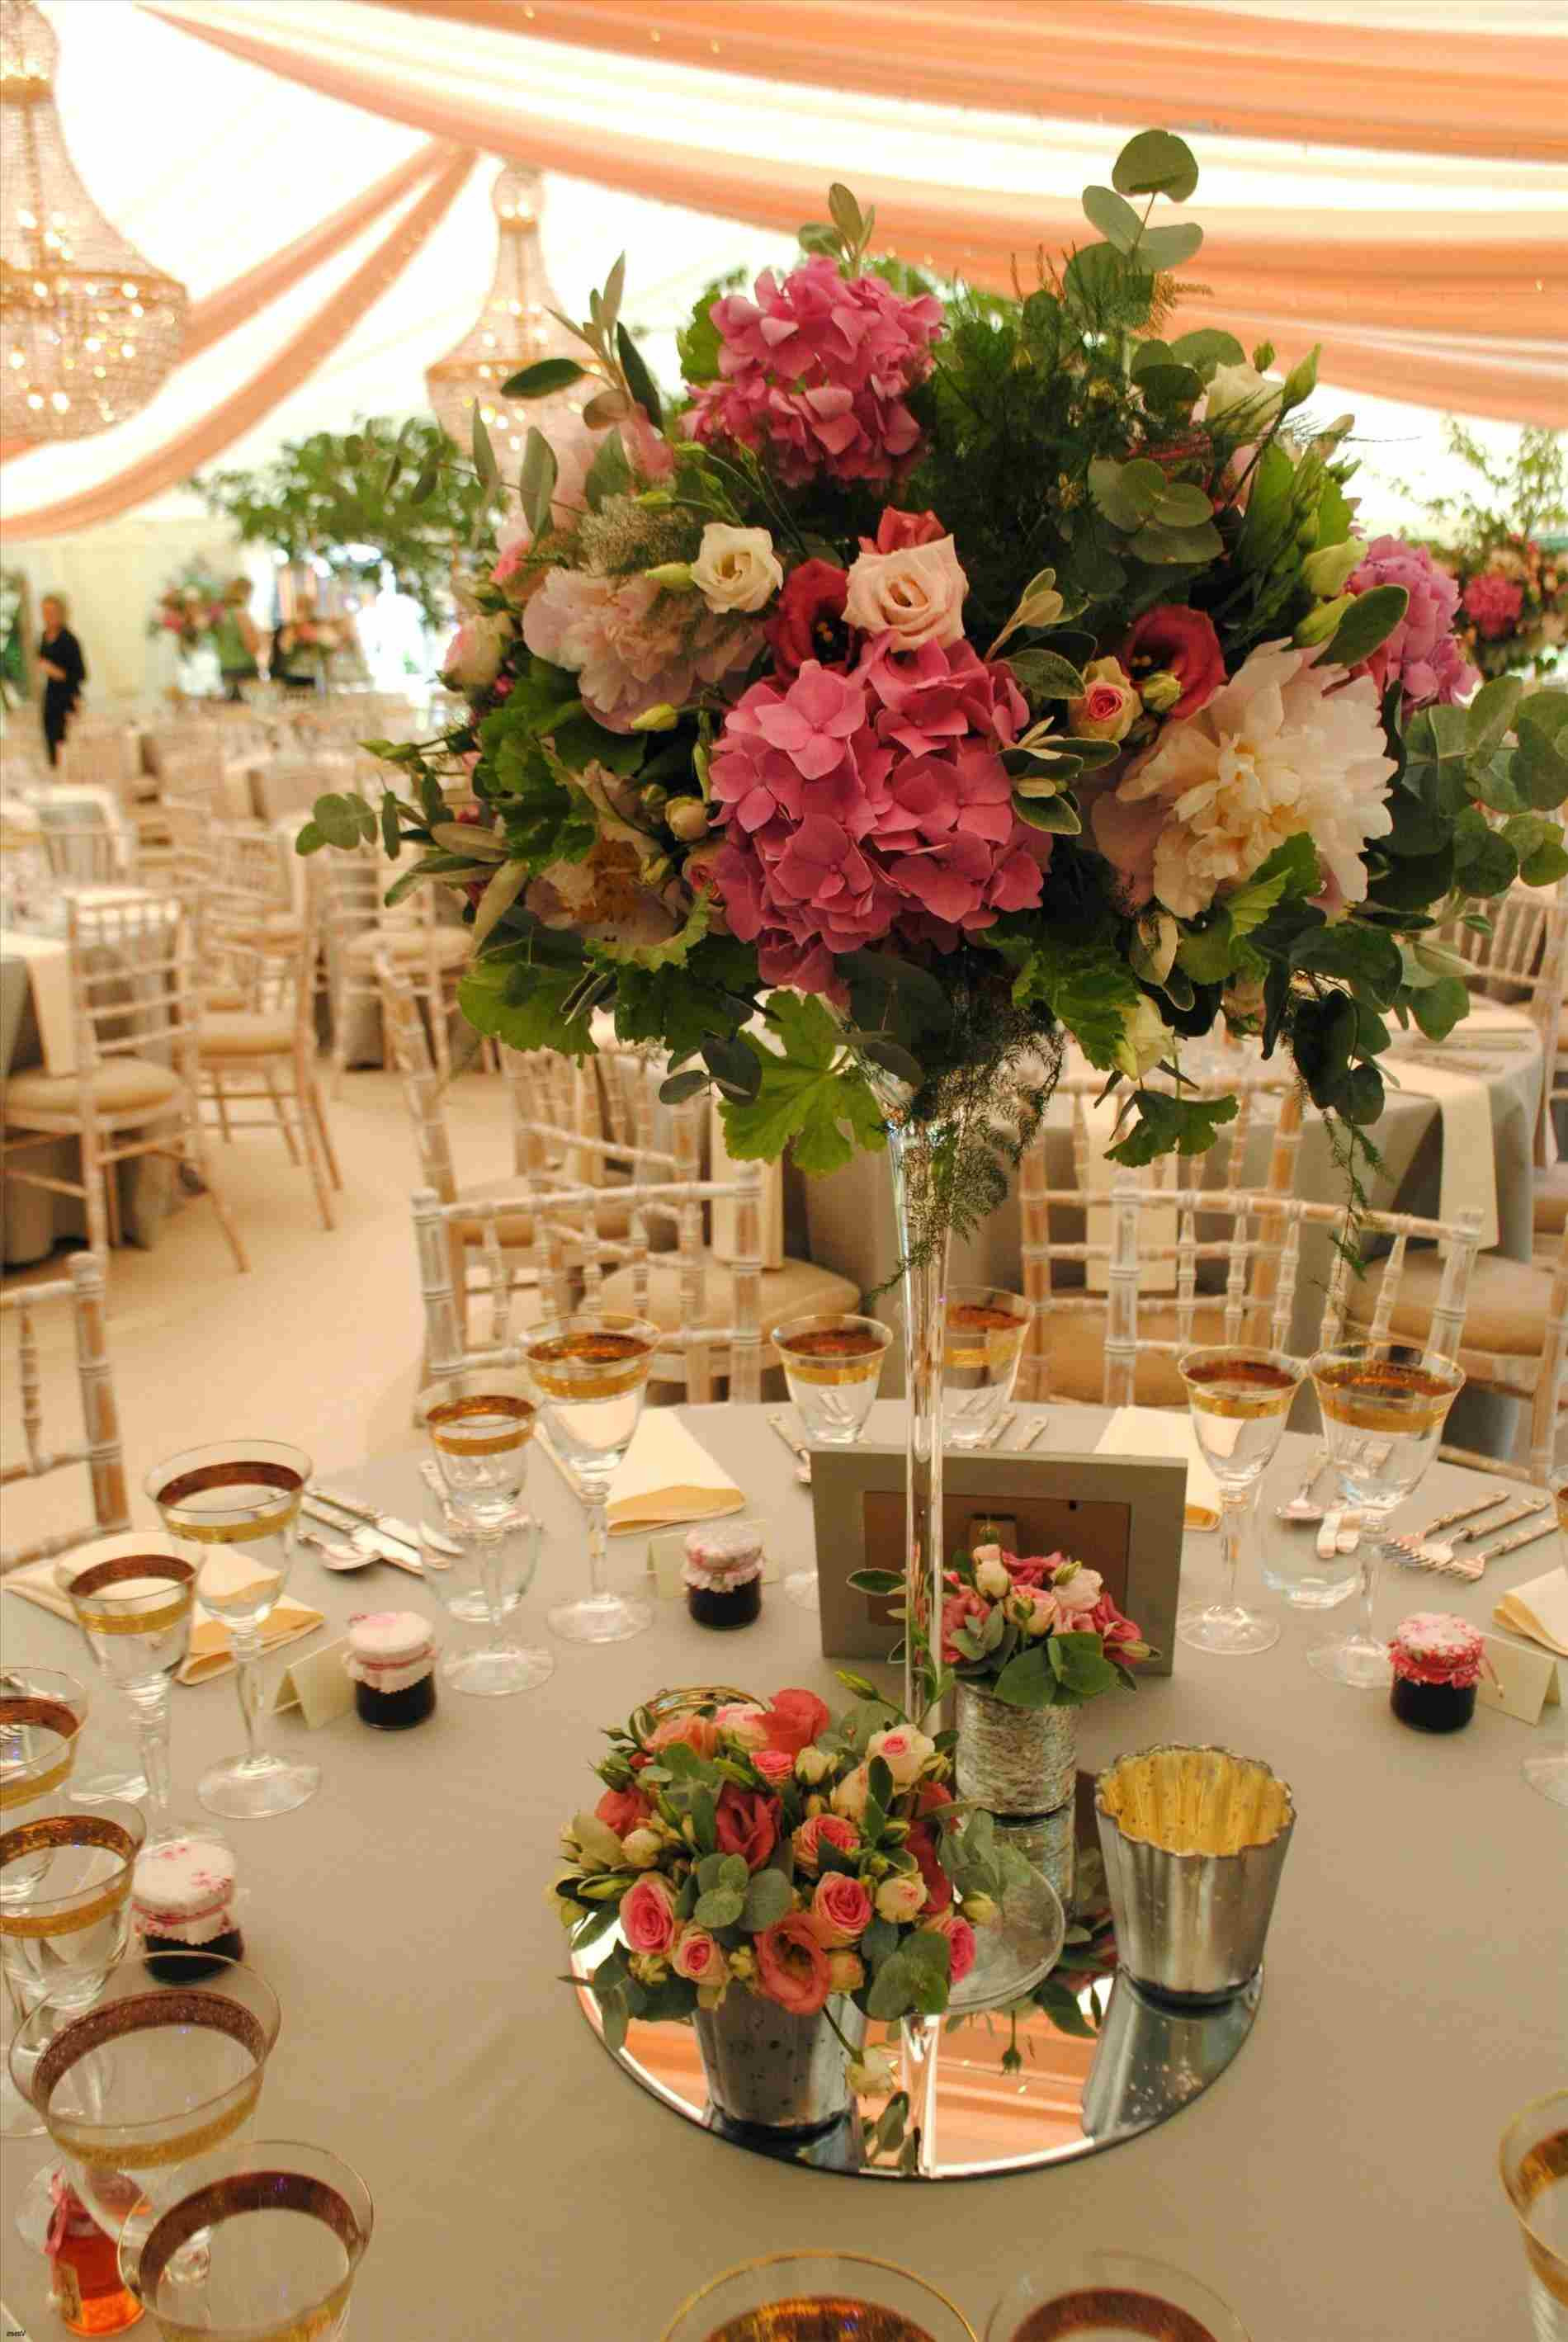 29 Best Tall Trumpet Wedding Vases 2024 free download tall trumpet wedding vases of diy tall vase vase and cellar image avorcor com with regard to vase diy tall vases whole bulkh as rhumds trumpet